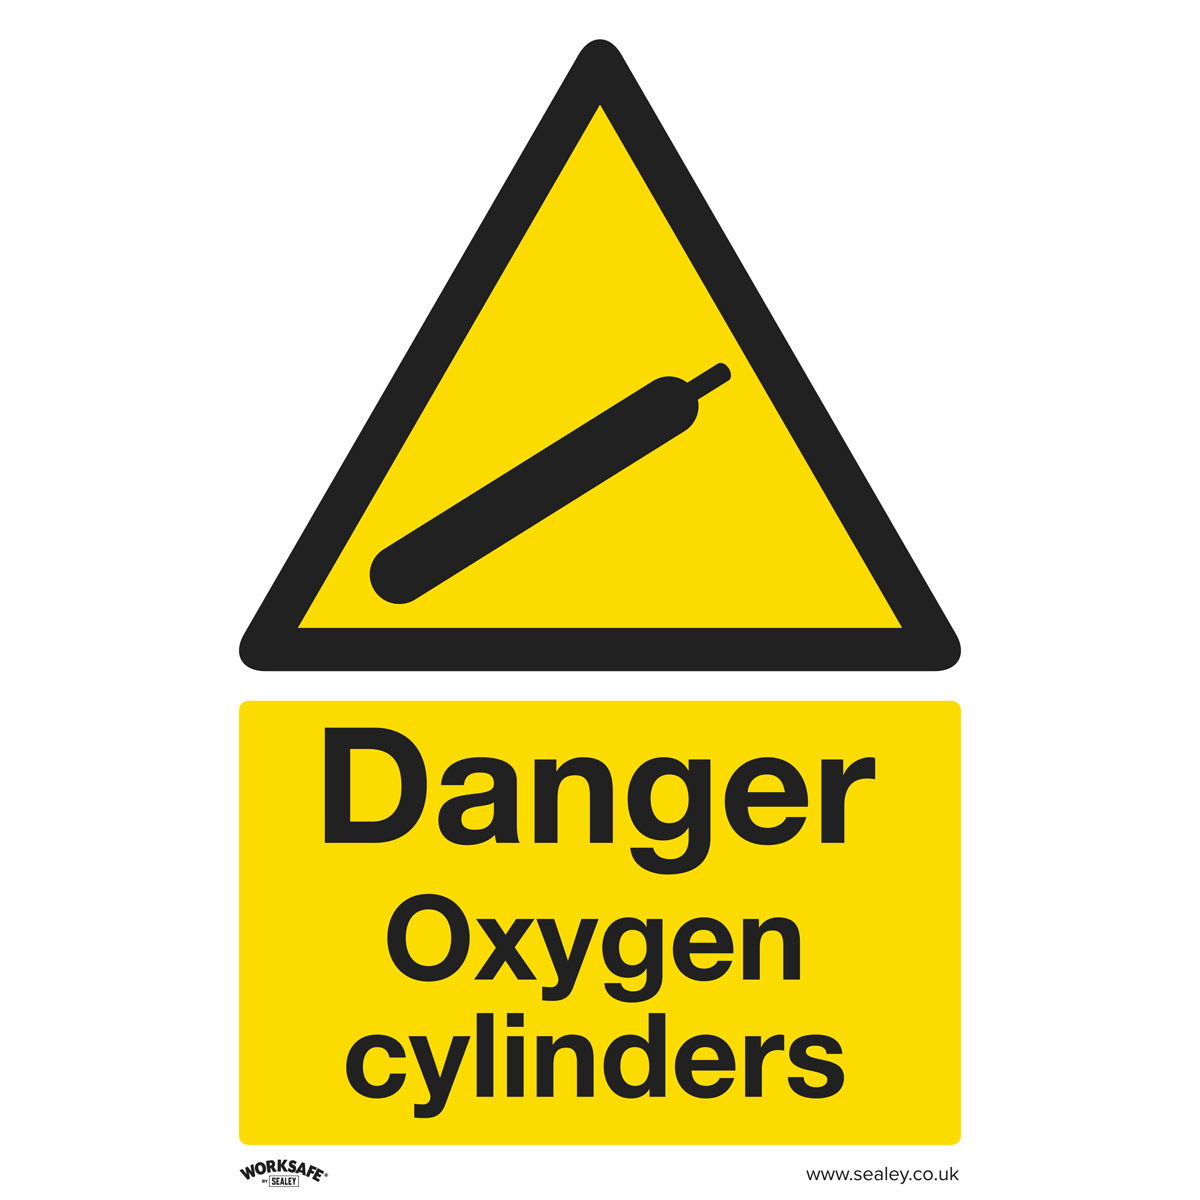 Sealey Danger Oxygen Cylinders - Warning Safety Sign - Self-Adhesive Vinyl